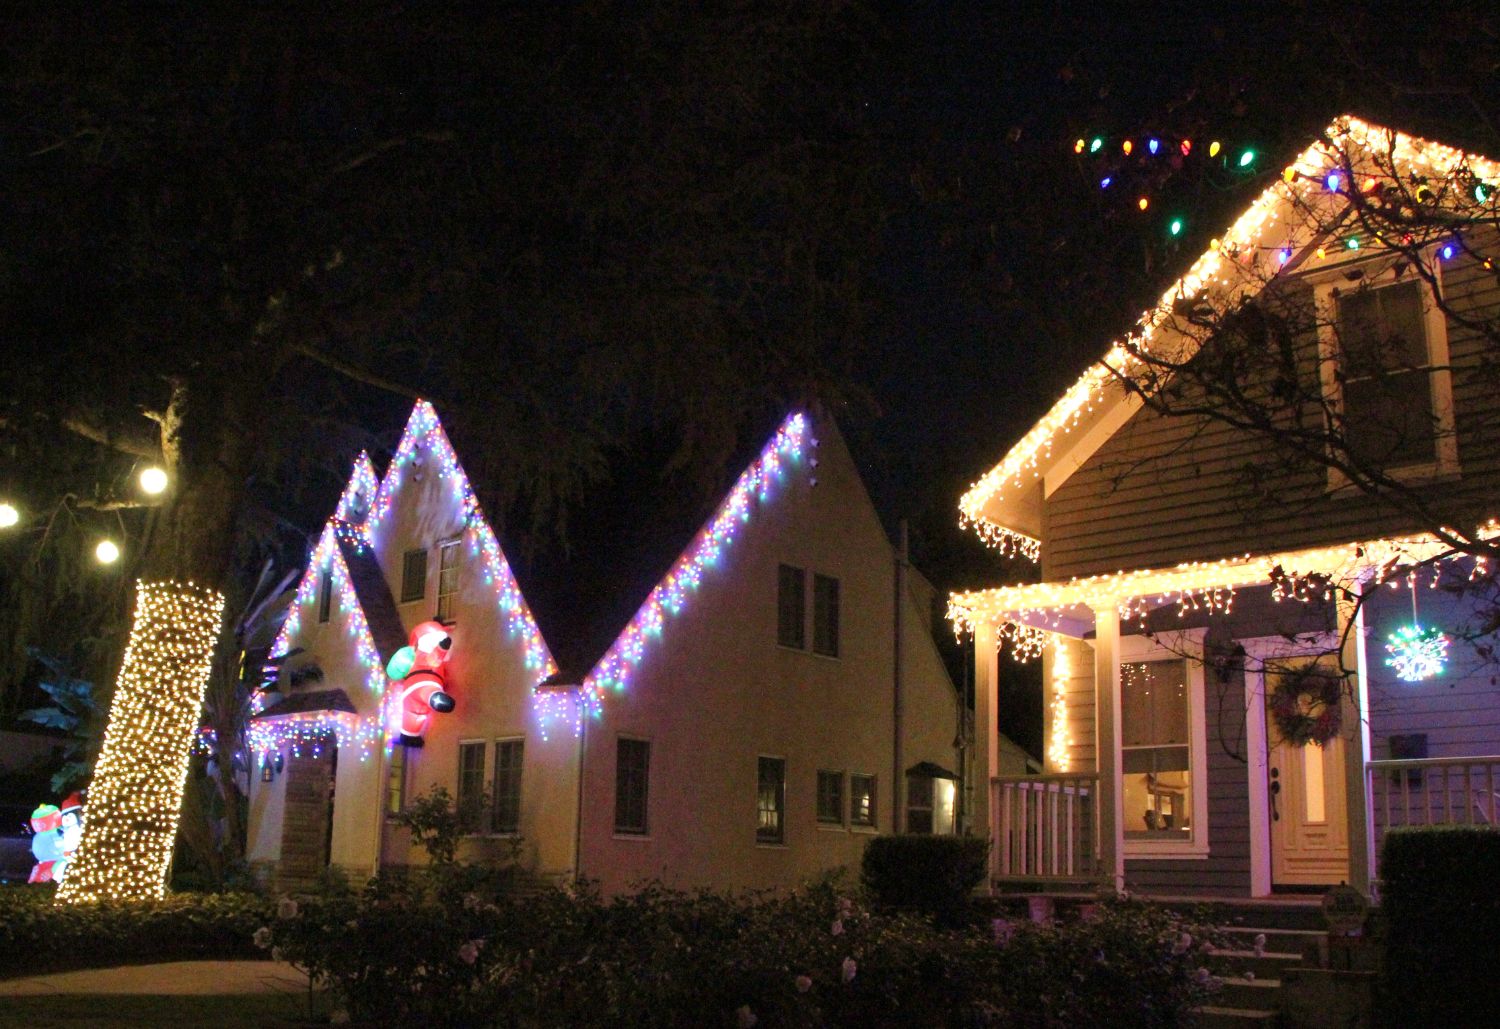 PHOTO: Henk Friezer | The South Pasadenan | Local streets lit up for the holidays